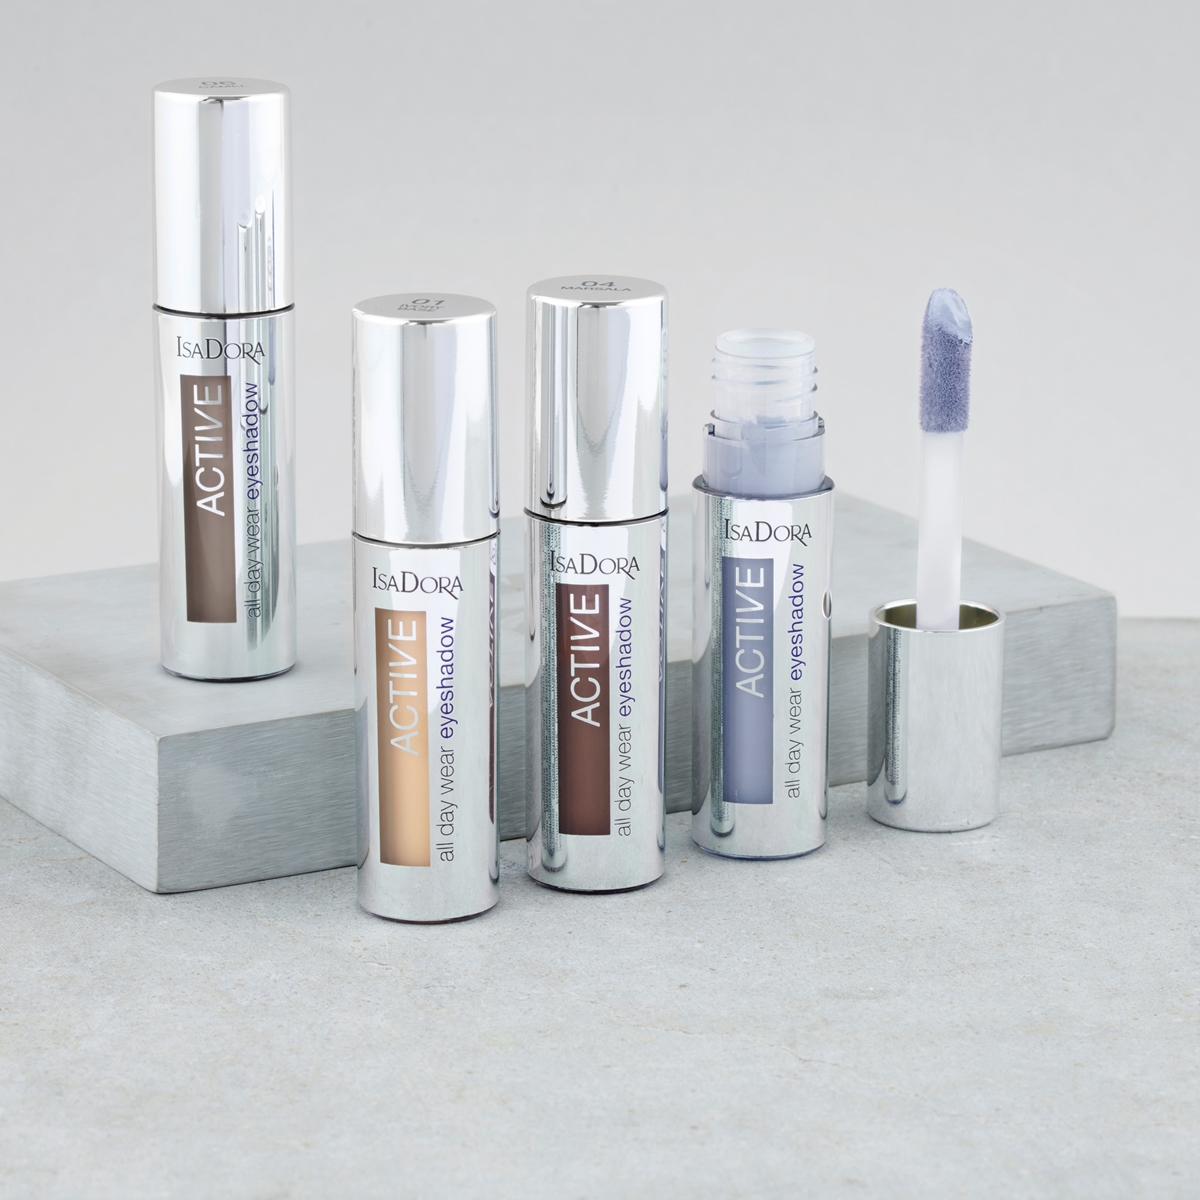 creamy, long-lasting color in four shades